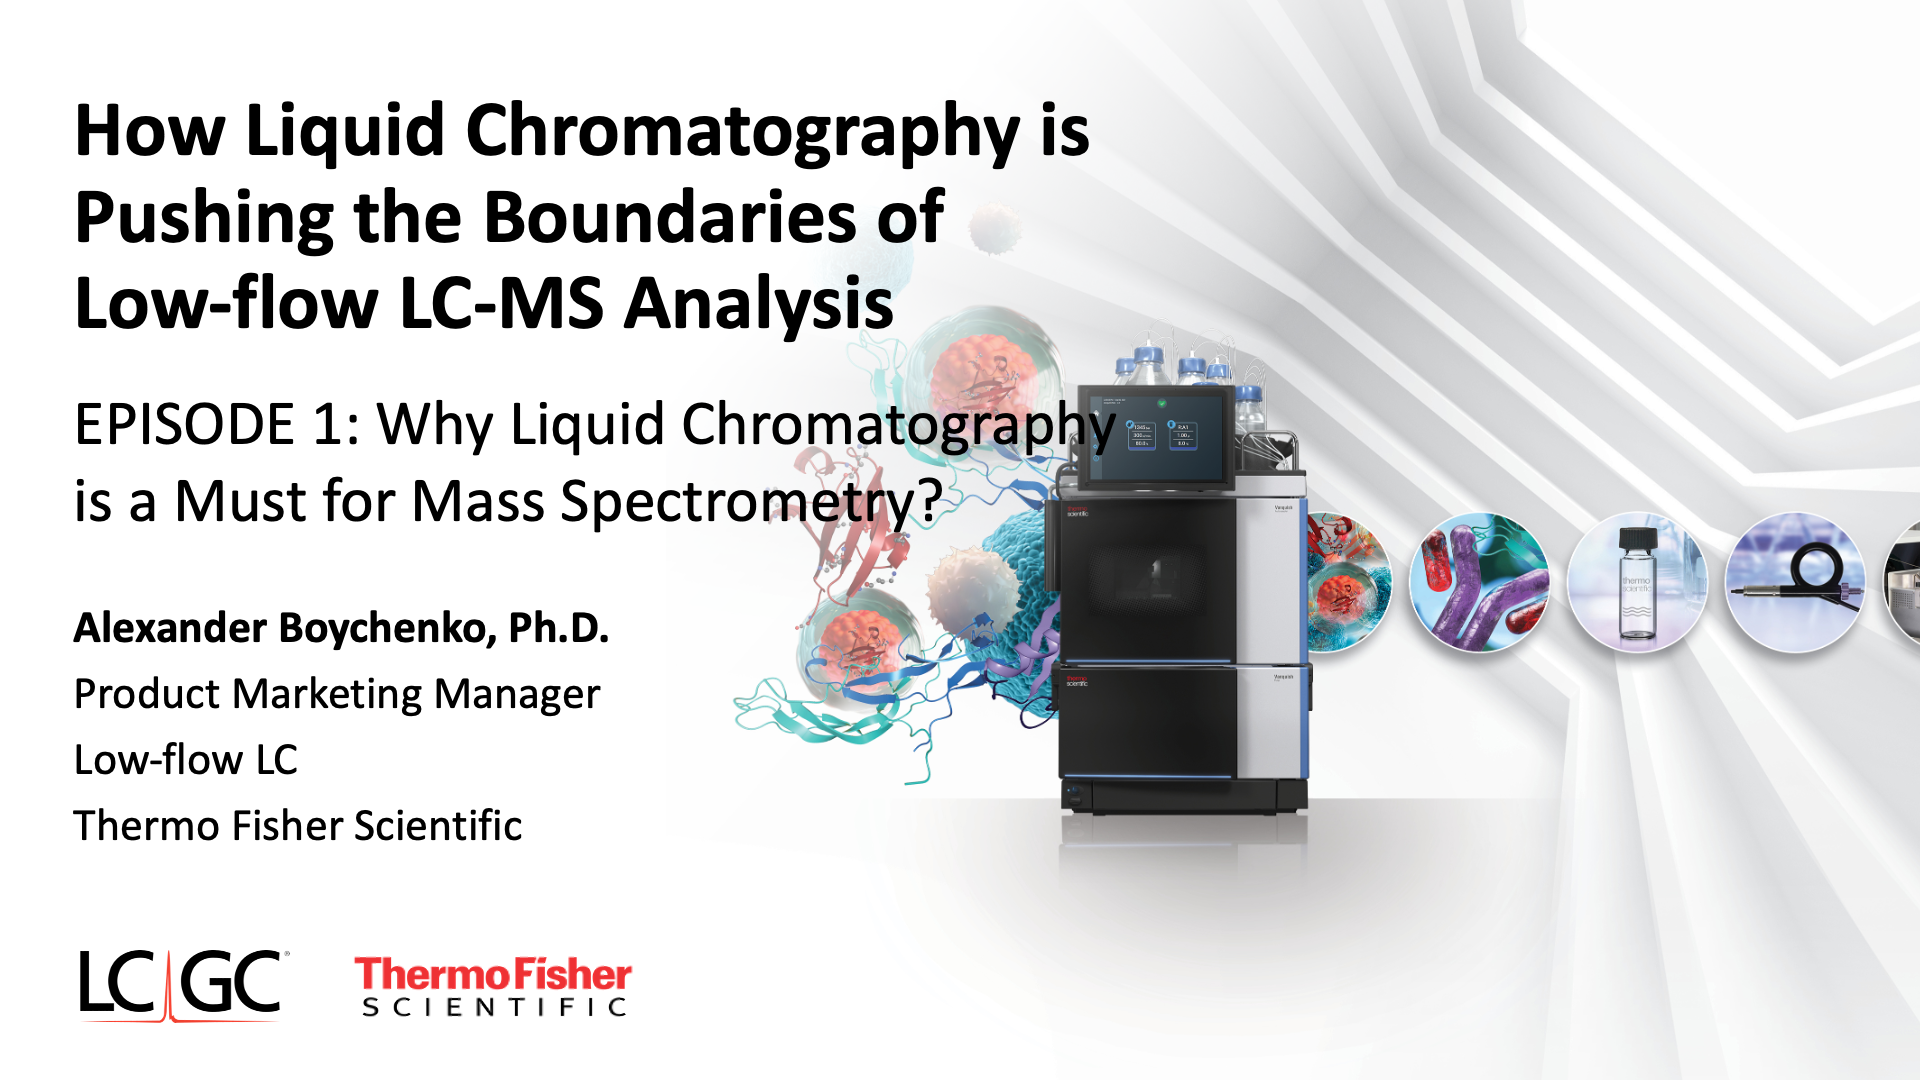 How Liquid Chromatography is pushing the boundaries of low-flow LC-MS Analysis